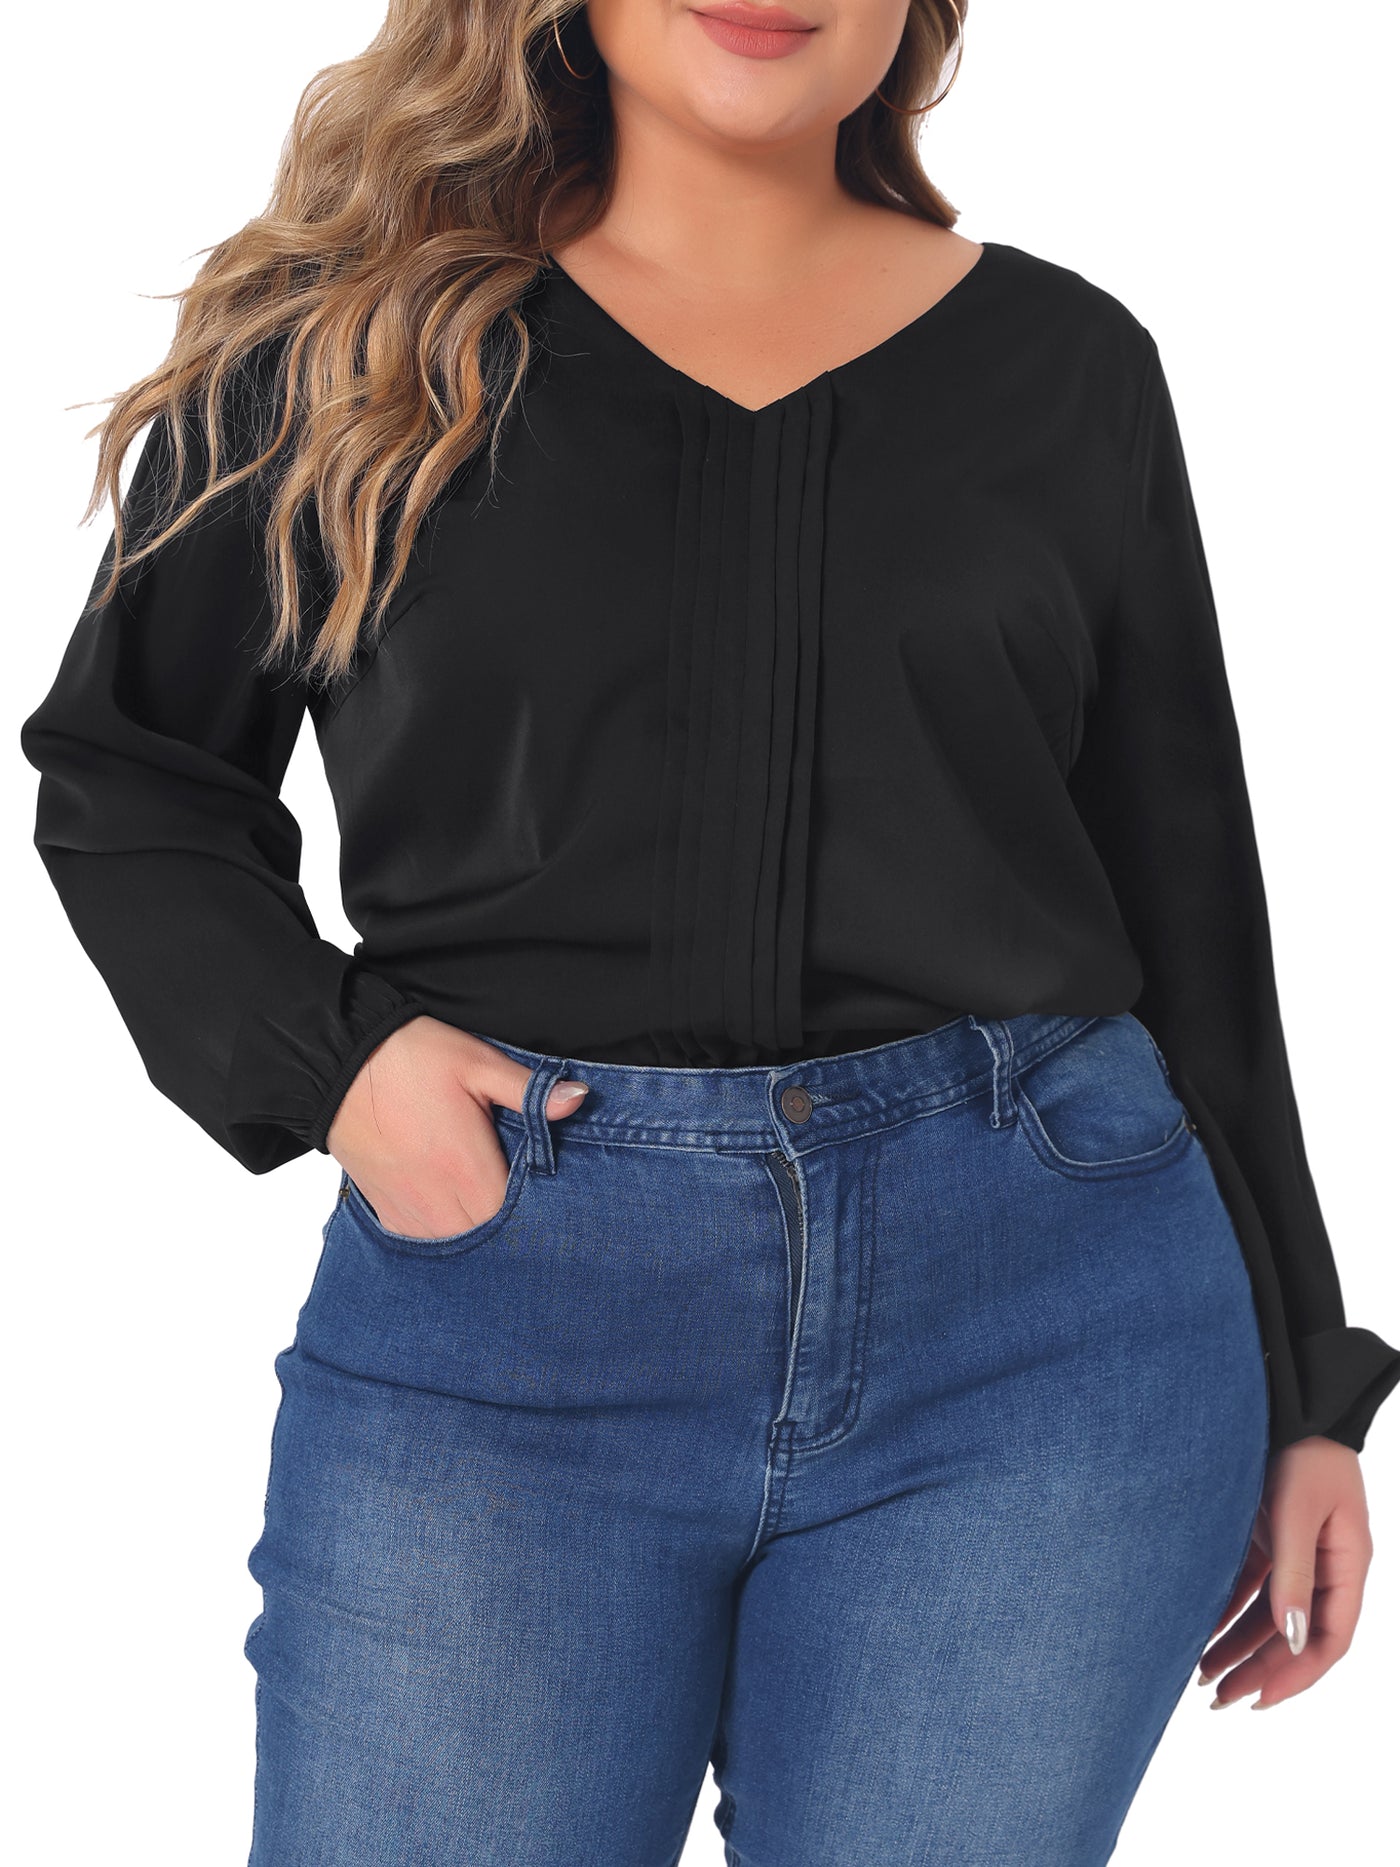 Bublédon Plus Size Blouses for Women Long Sleeve V Neck Casual Chiffon Pleated Front Tops Shirts